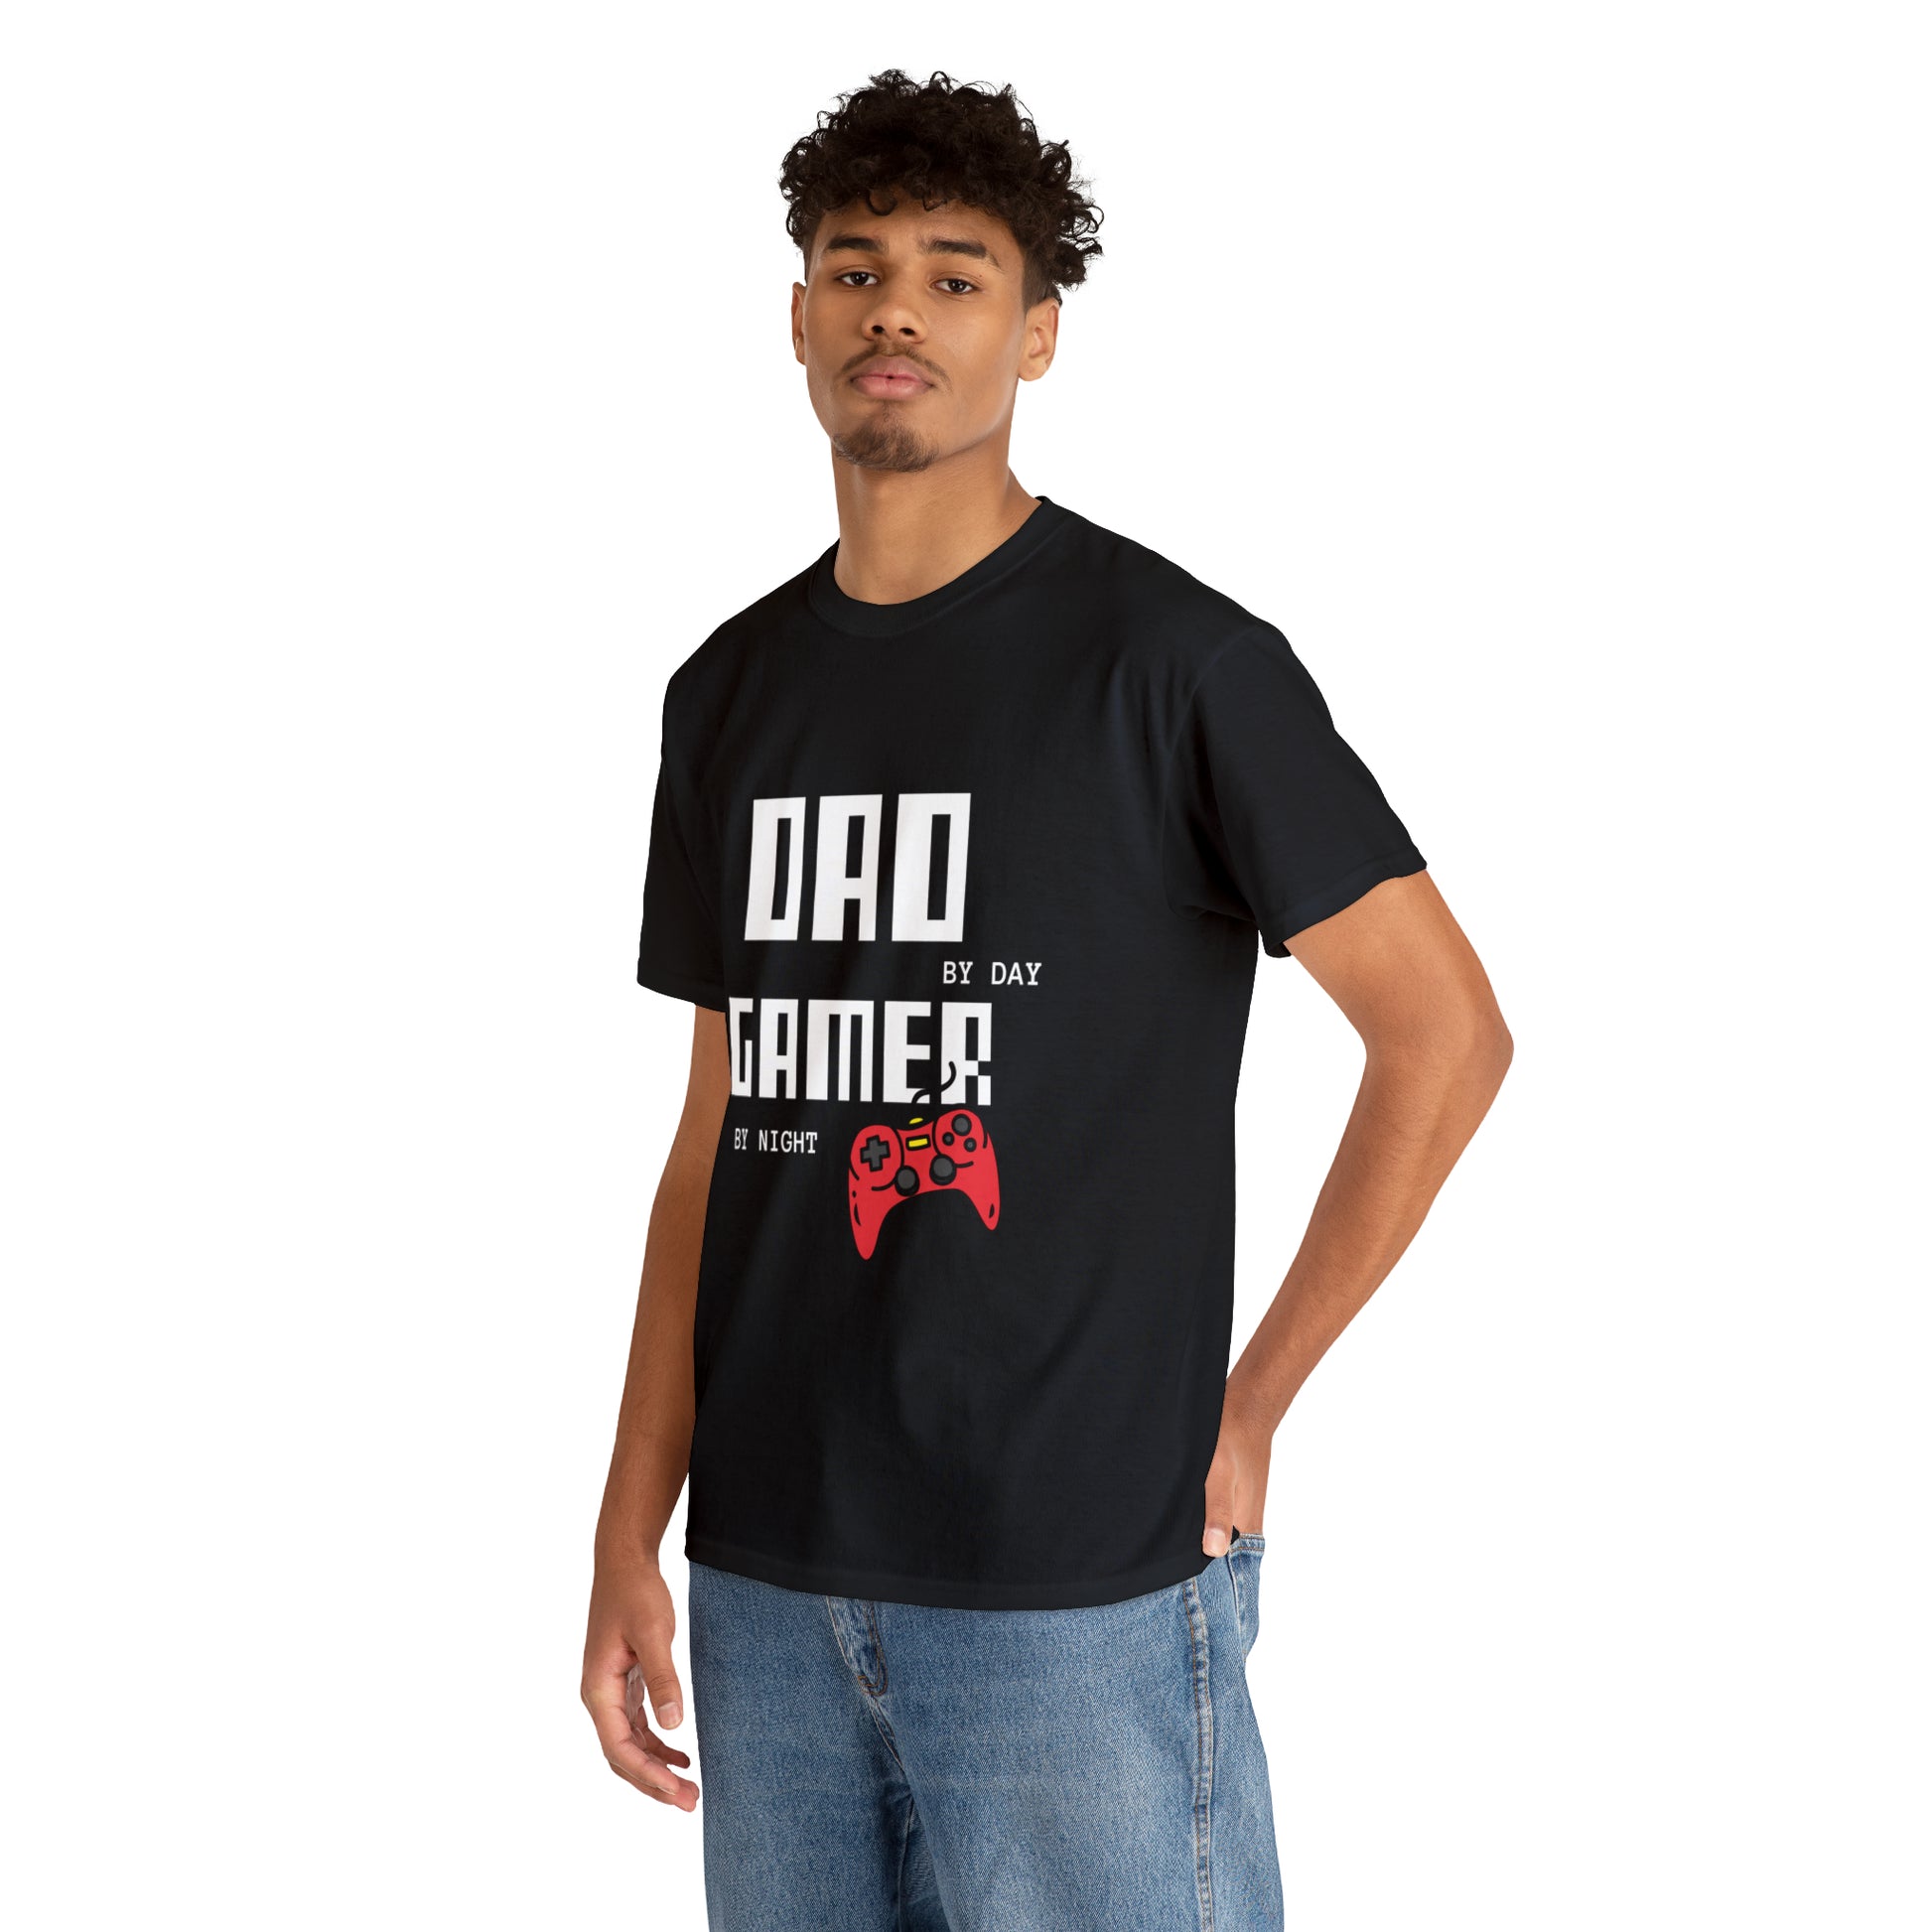 Gaming apparel for dads